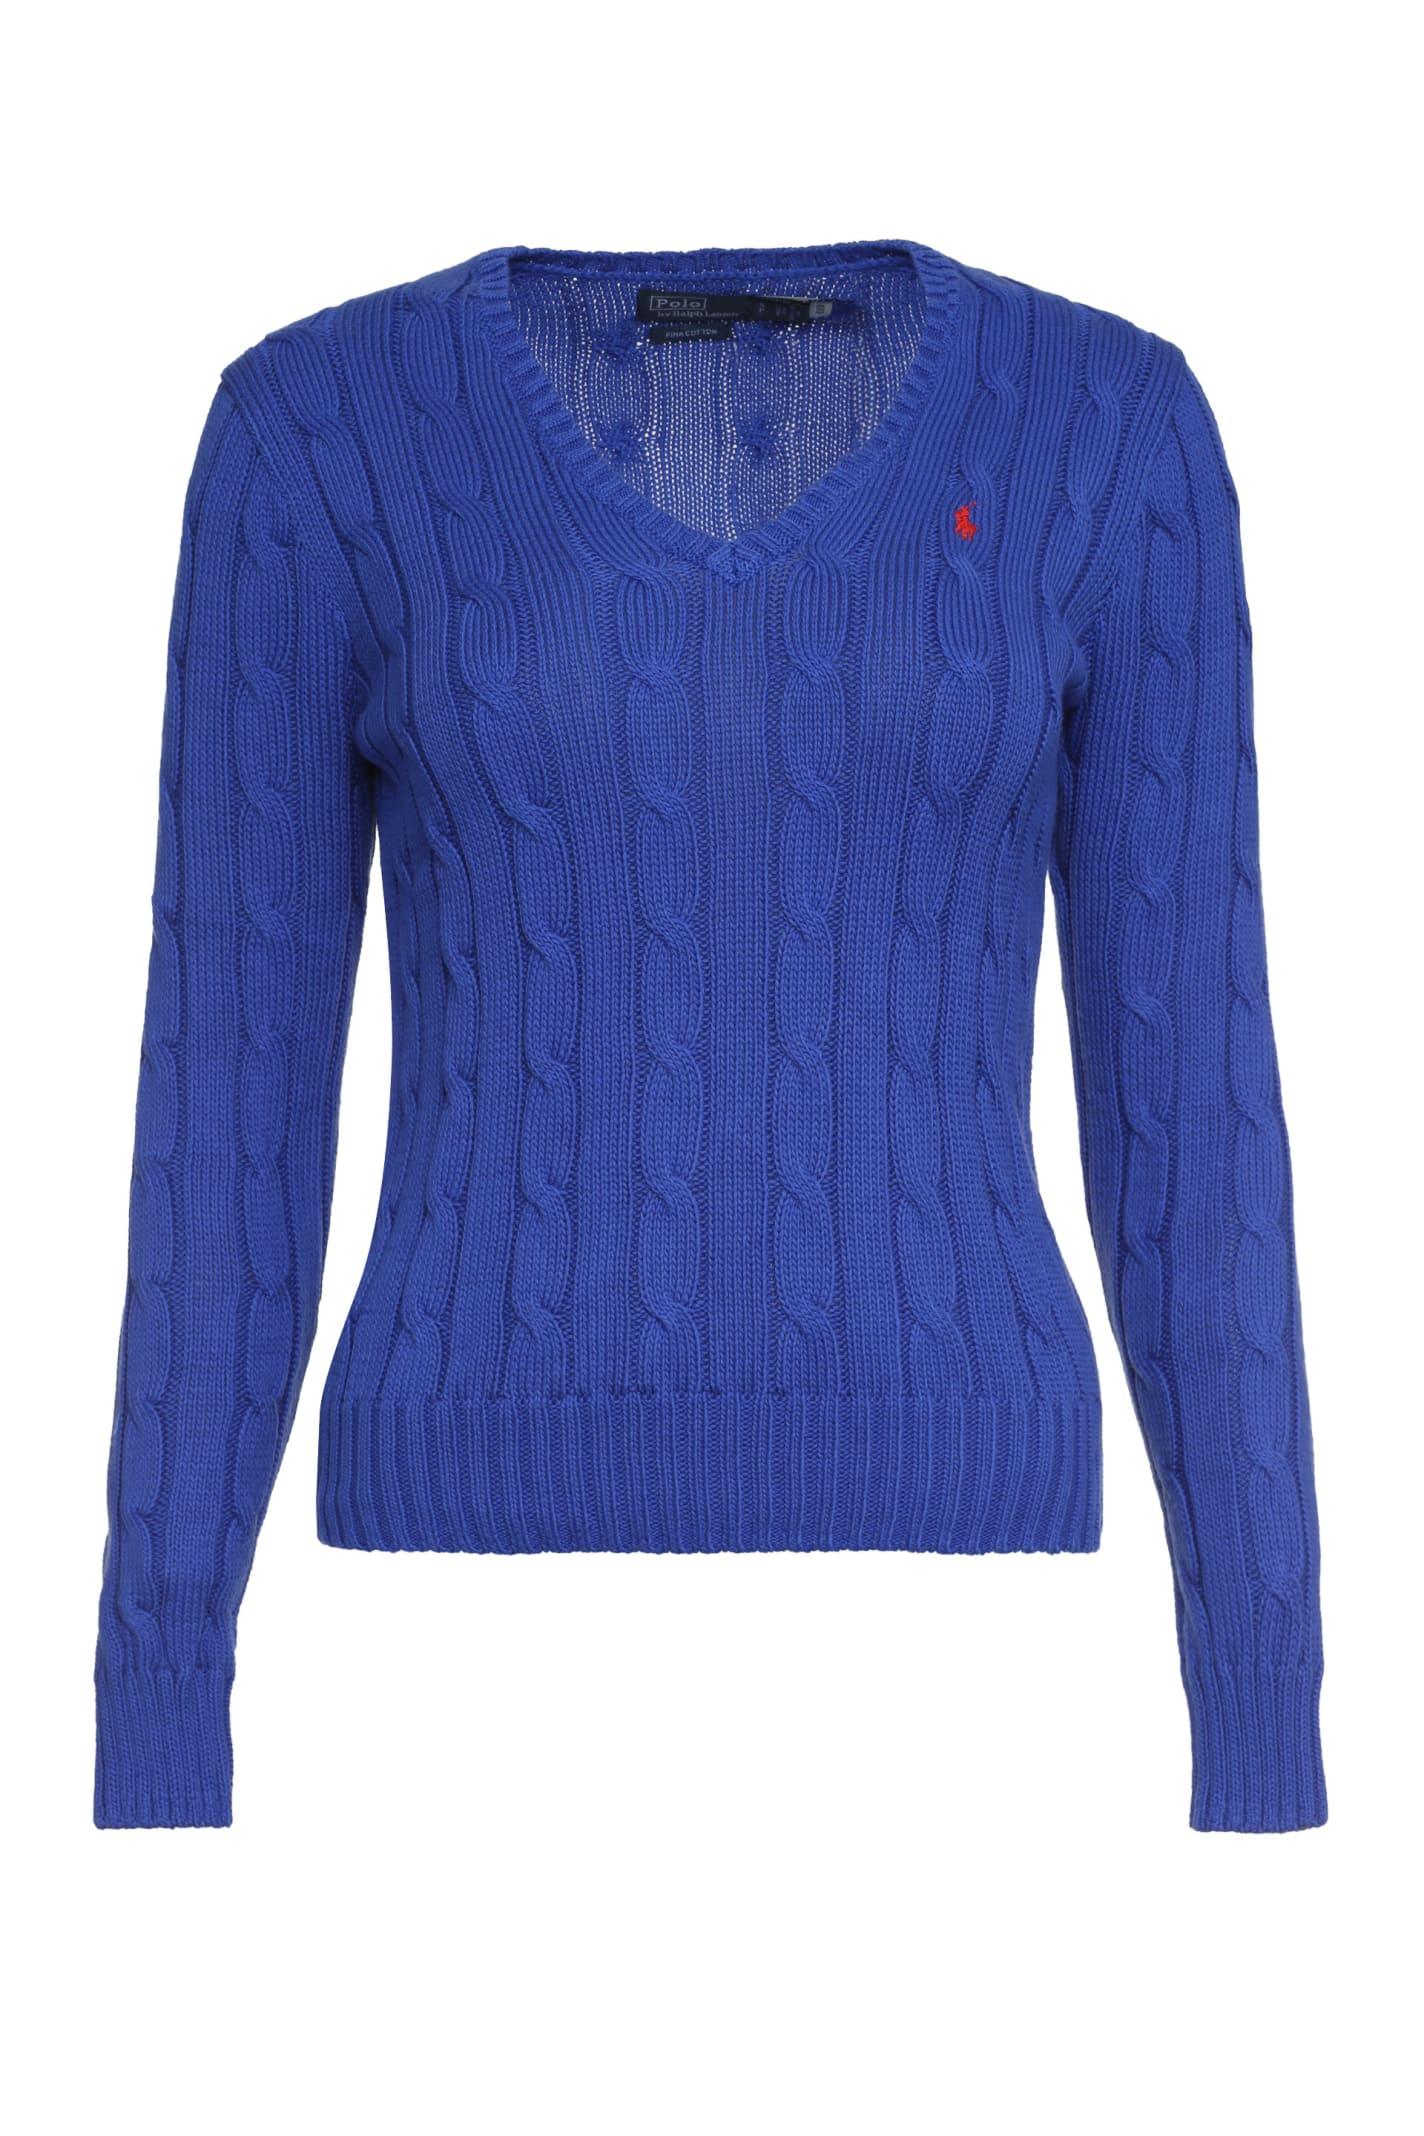 Polo Ralph Lauren Cable Knit Sweater in Blue | Lyst